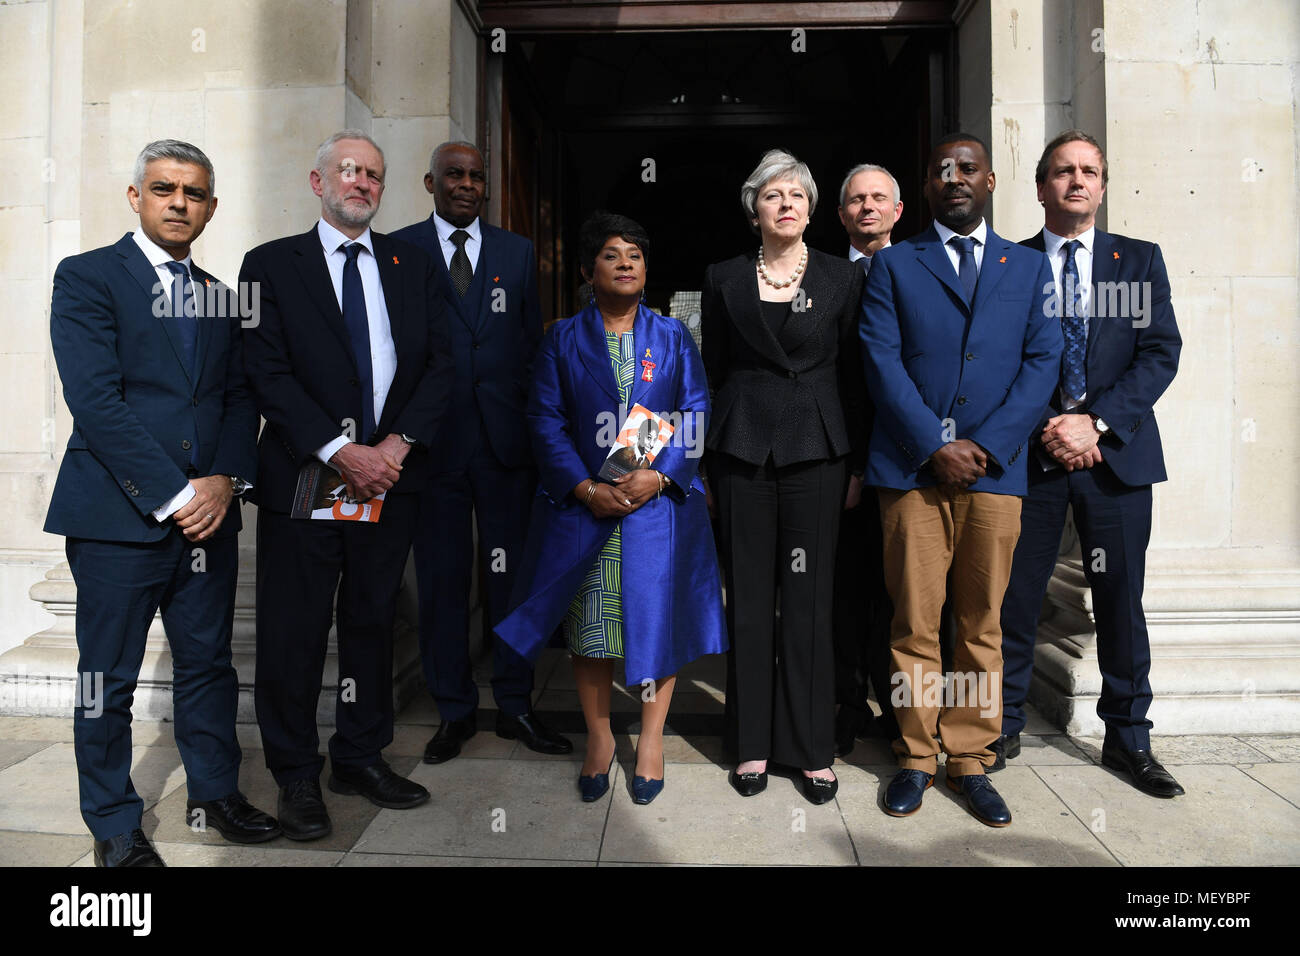 Mayor of London Sadiq Khan, Labour leader Jeremy Corbyn, Neville Lawrence, Baroness Lawrence, Prime Minister Theresa May, Cabinet Office minister David Lidington, Stuart Lawrence and Minister for Policing Nick Hurd after attending a memorial service at St Martin-in-the-Fields in Trafalgar Square, London to commemorate the 25th anniversary of the murder of Stephen Lawrence. Stock Photo